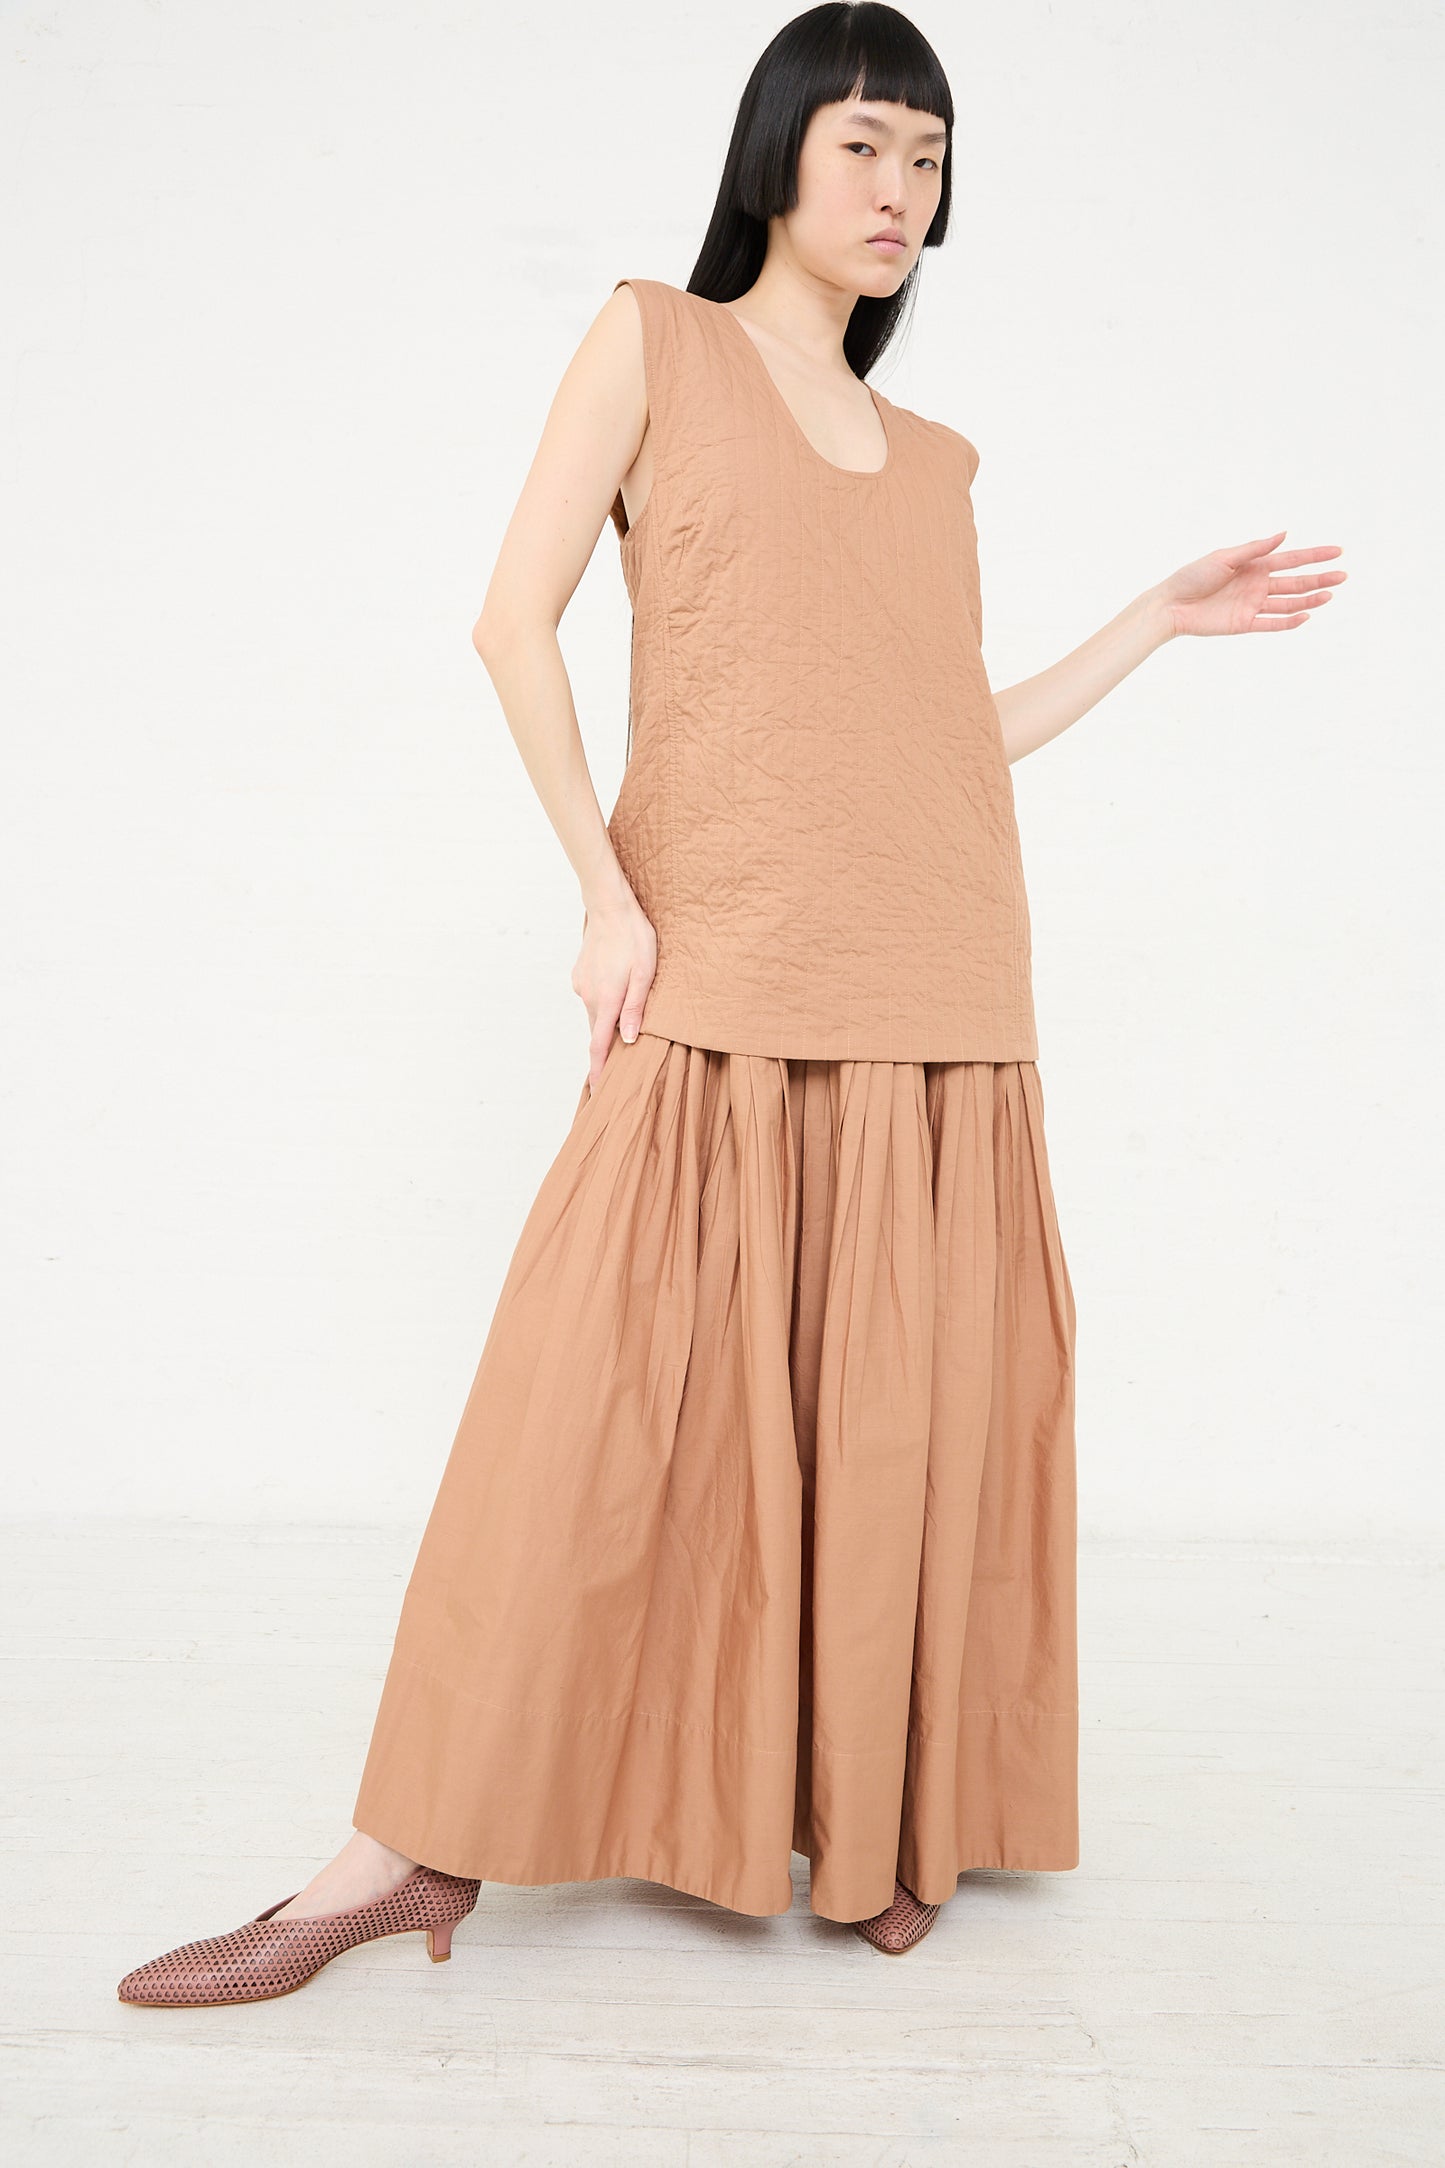 Woman in a sleeveless Rachel Comey Calin Dress in Camel posing on a white background.